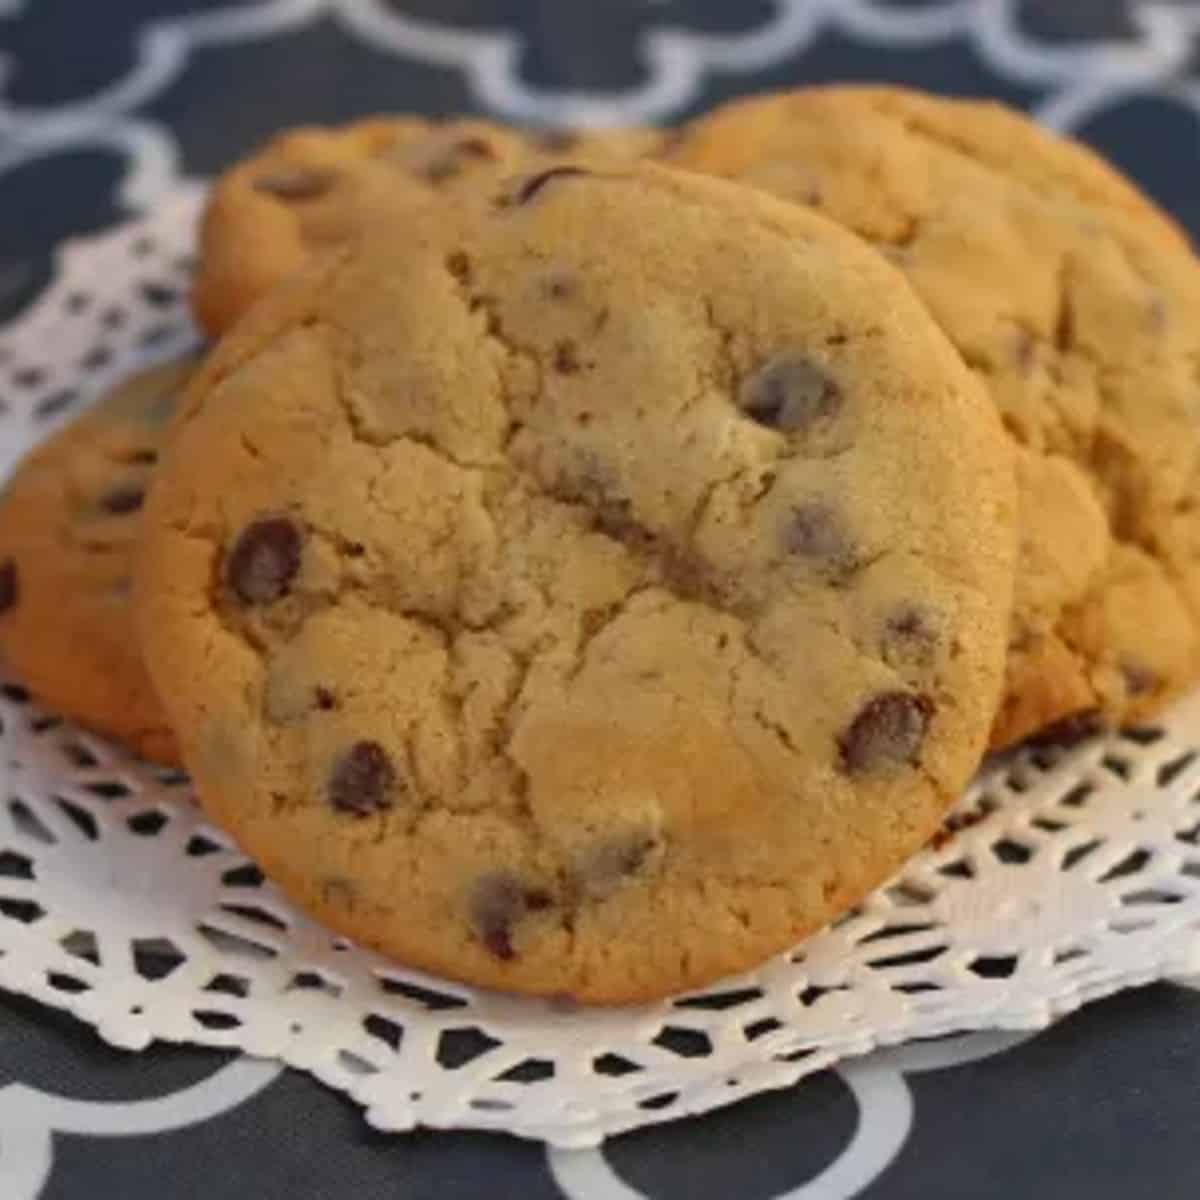 a plate full of twice baked chocolate chip cookies with semi sweet chocolate chips and a biscotti like taste.